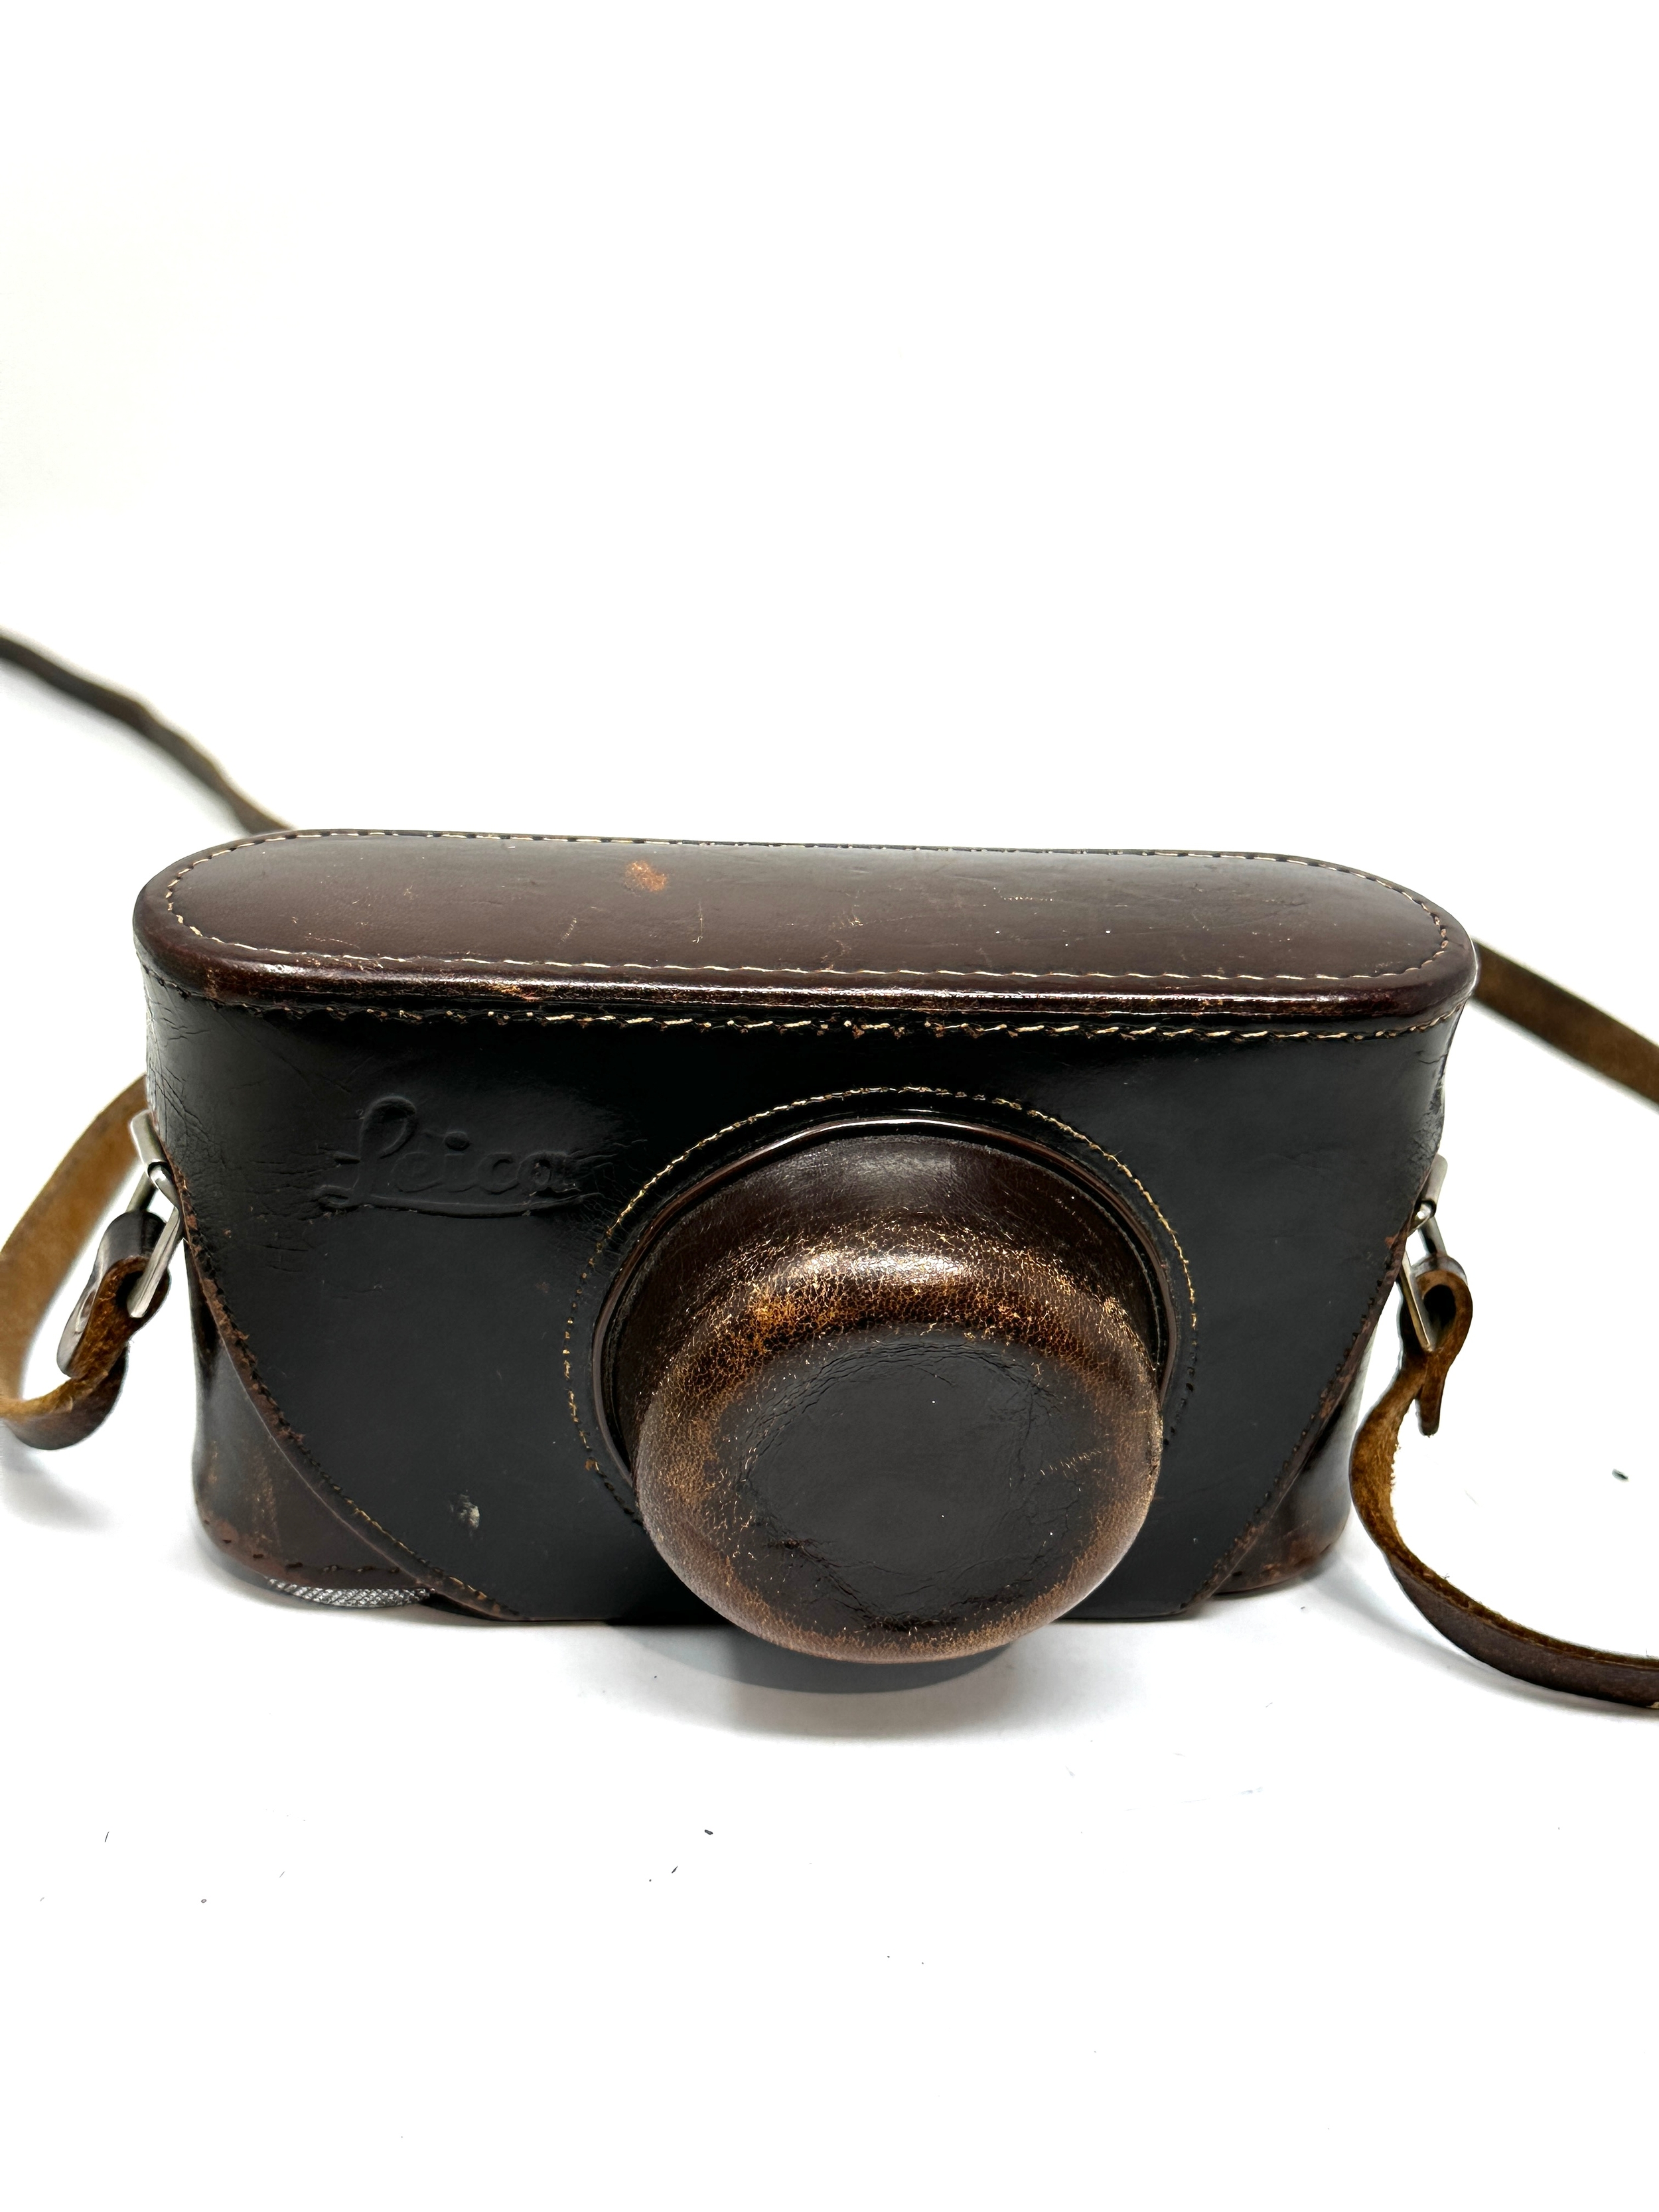 Vintage leica camera original leather cased reads Leica N 150356 Ernst Leitz d.r.p also reads on - Image 10 of 10